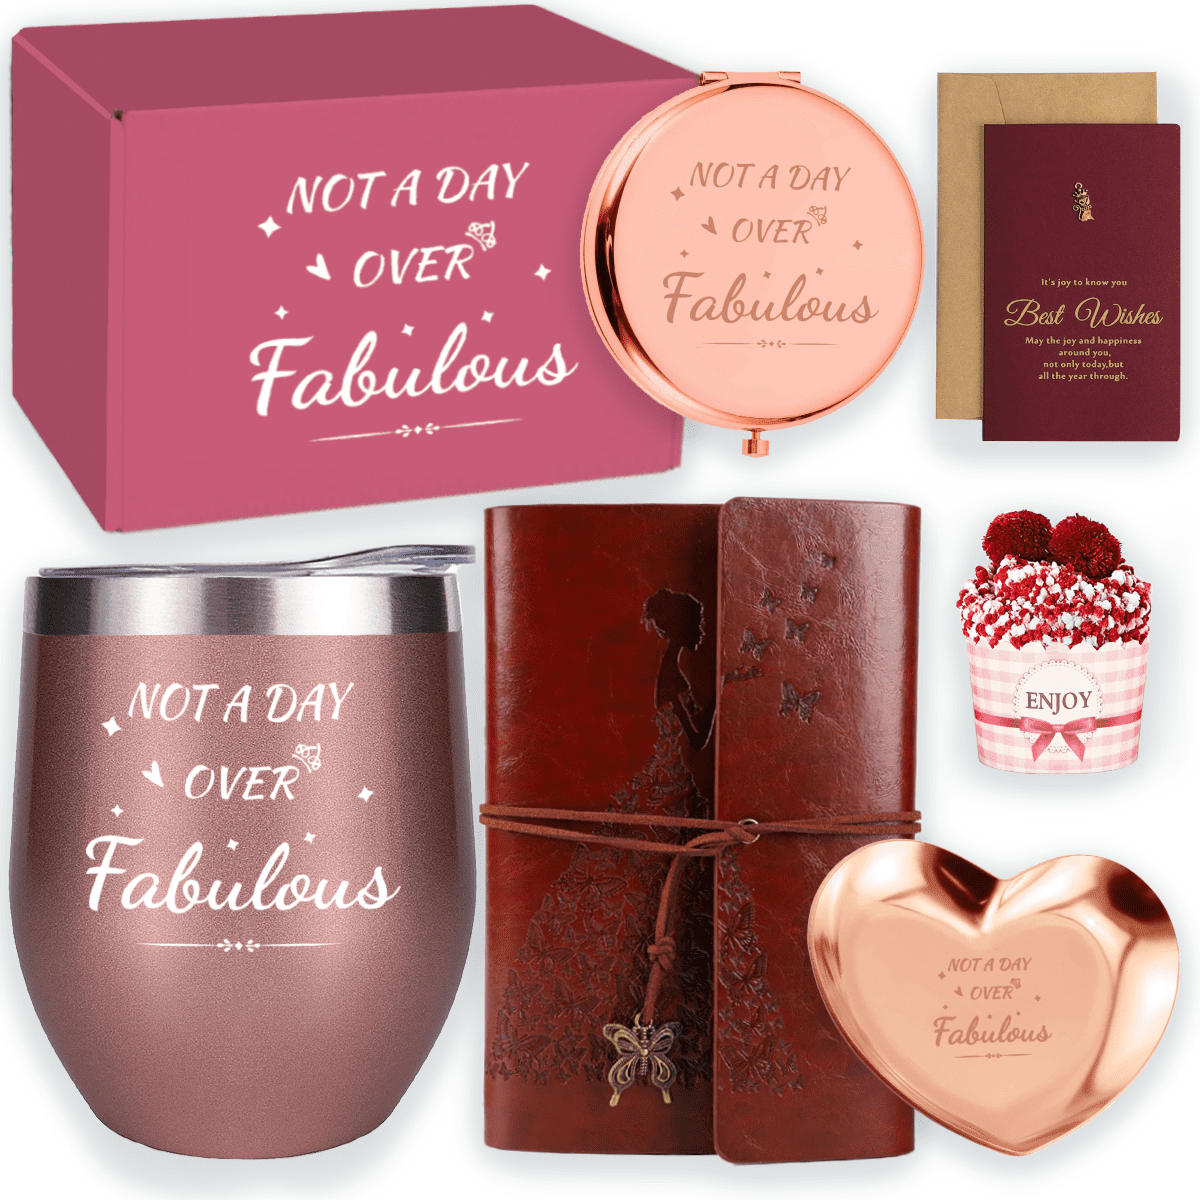 Birthday Christmas Gifts for Women, Unique Gift Basket for Her Women Grandma Sister Girlfriend Wife Best Friend Co-Worker, Funny Gifts Box Ideas